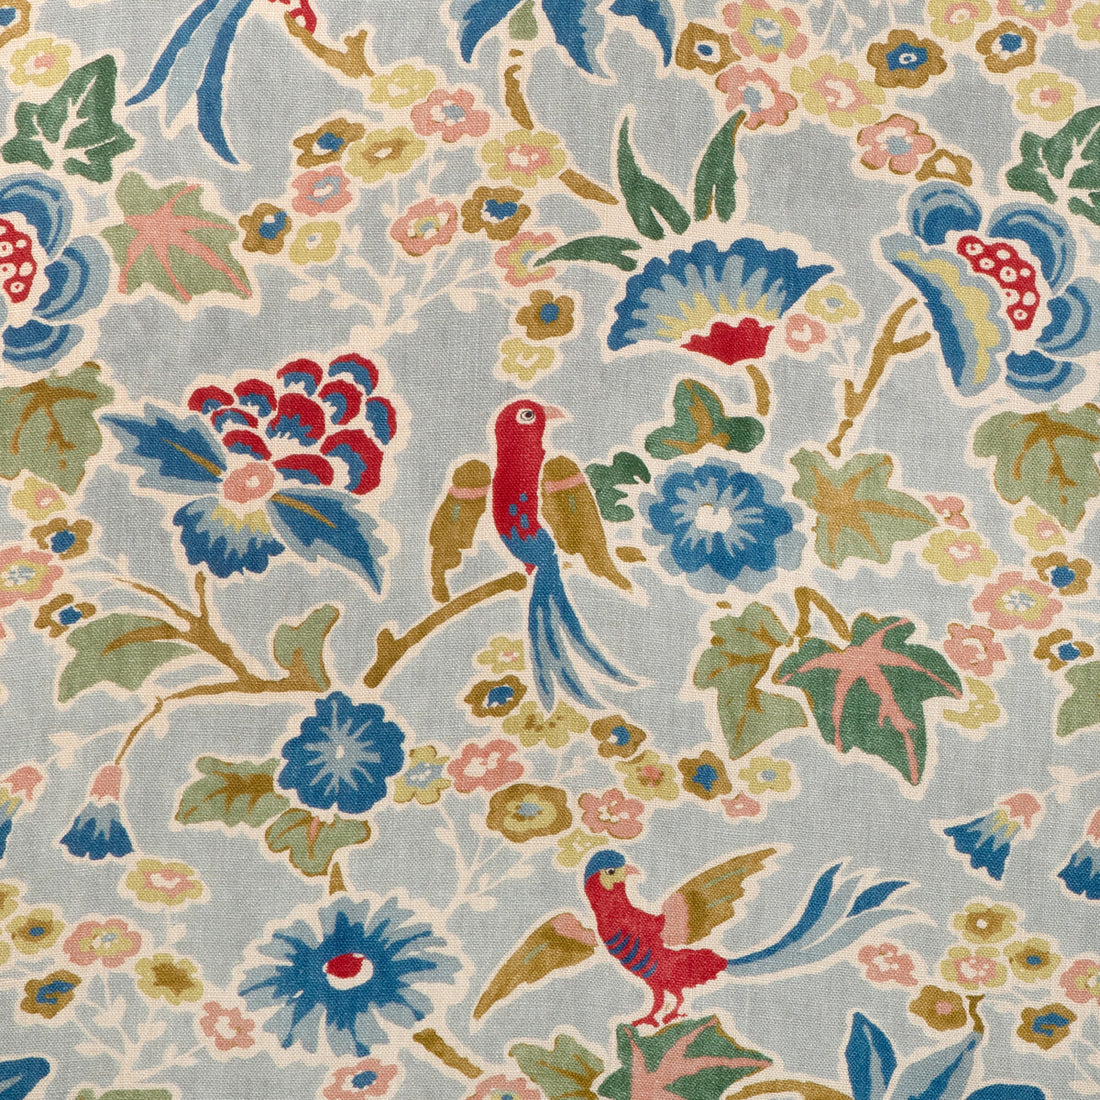 Posy Print fabric in blue/multi color - pattern 2023142.519.0 - by Lee Jofa in the Garden Walk collection